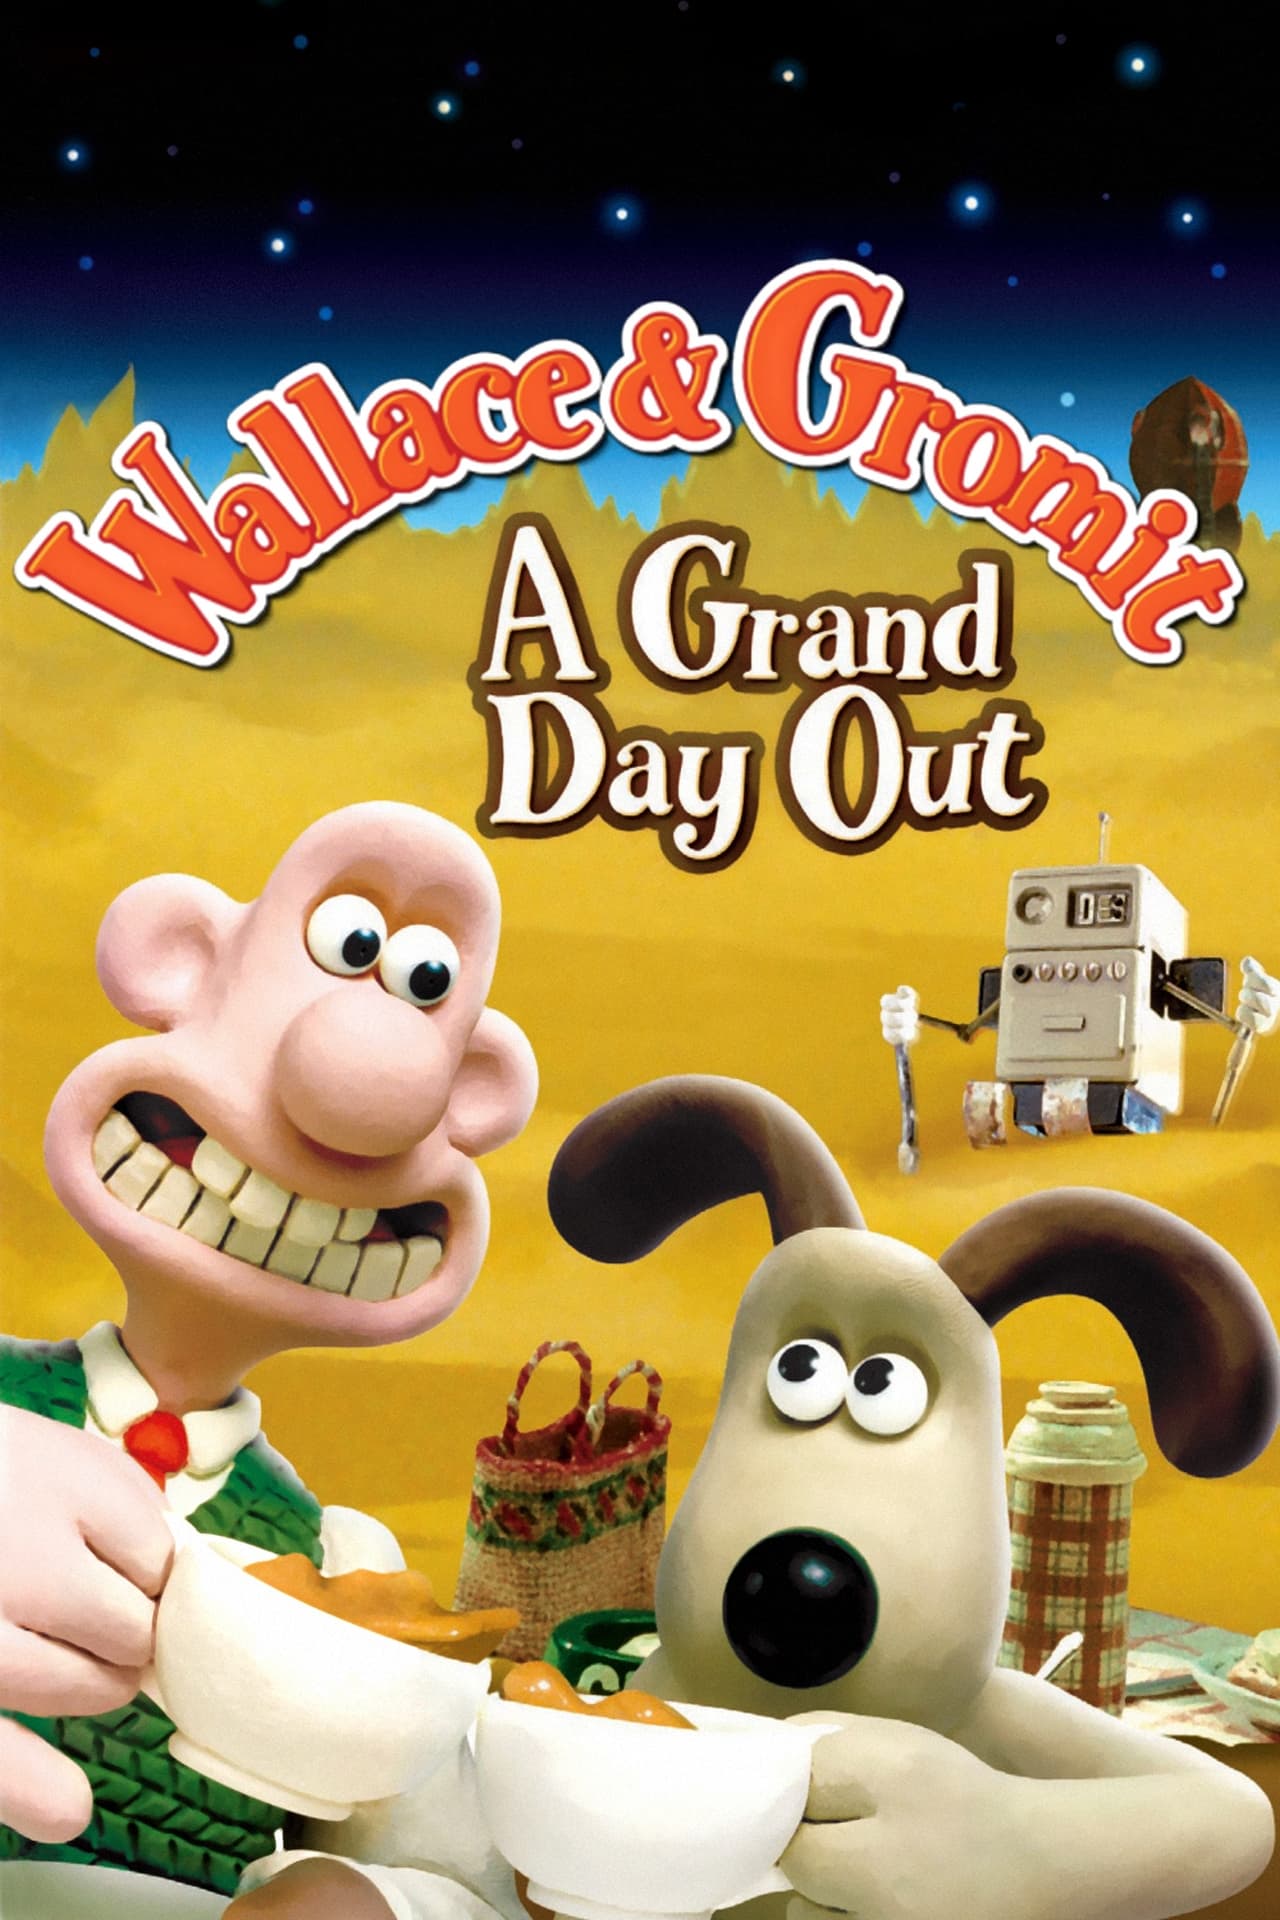 EN - A Grand Day Out - Wallace & Gromit Aardman Collection